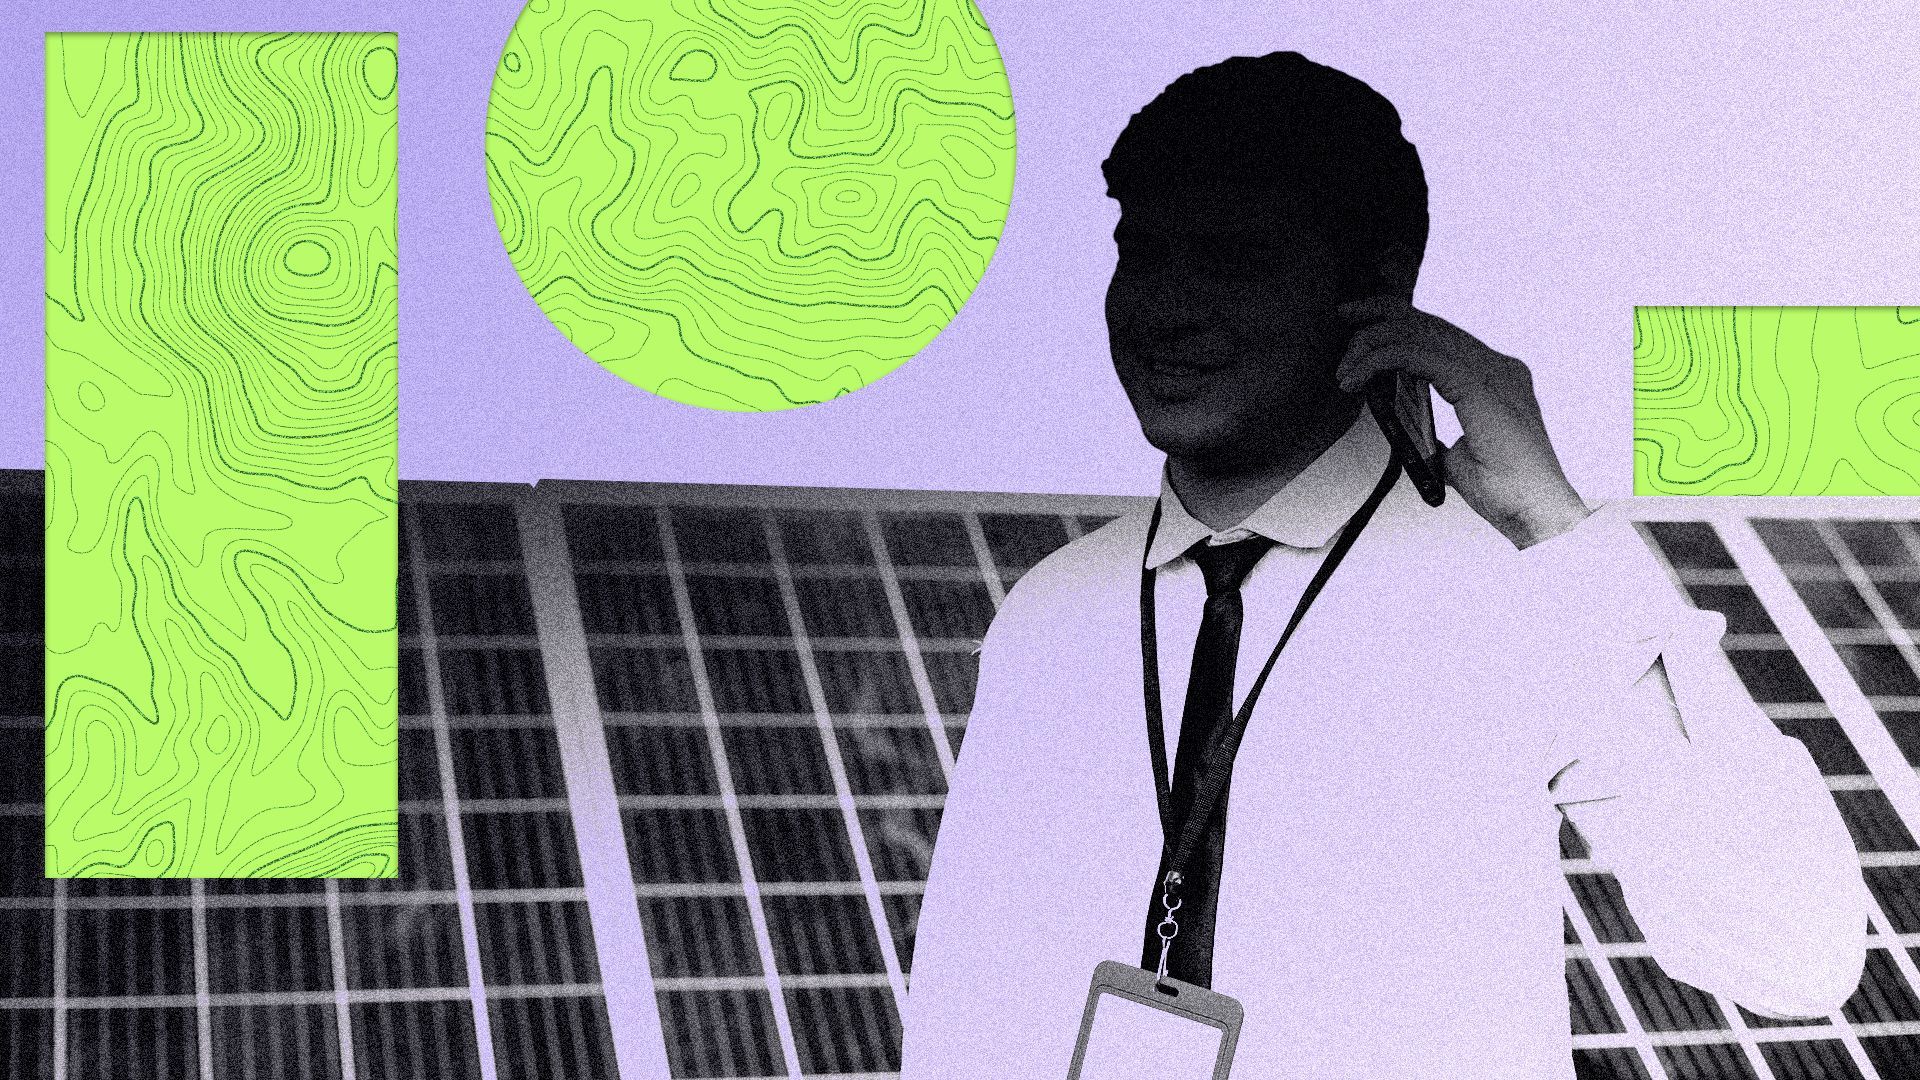 Illustration of a person dressed in a suit wearing a lanyard and speaking on a phone while standing in front of a row of solar panels. The figure is surrounded by graphic shapes filled with contour line patterns.